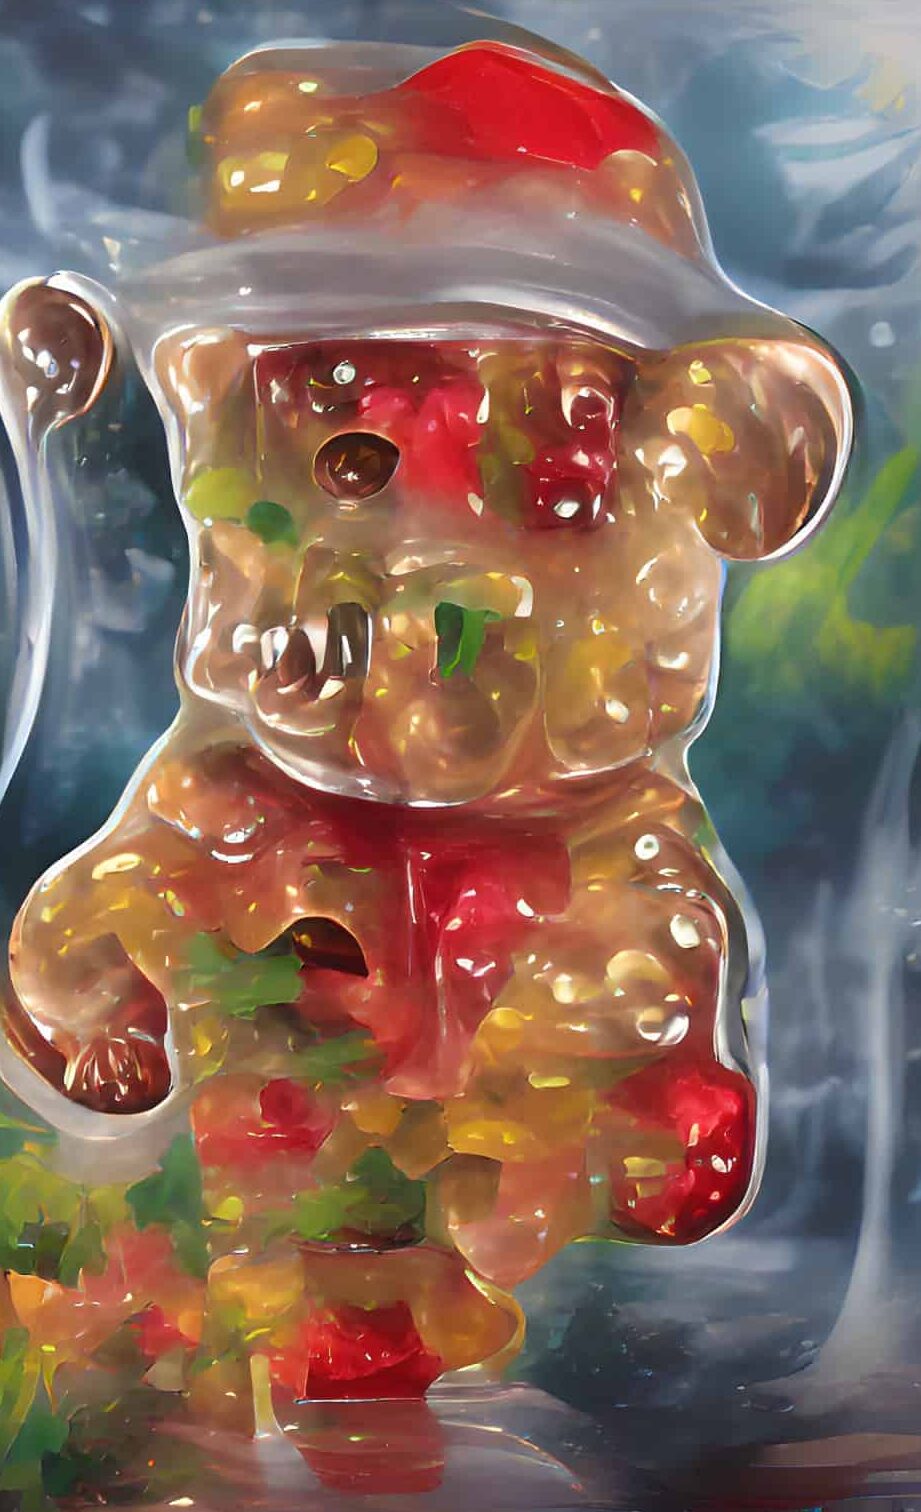 what are gummy bear implants